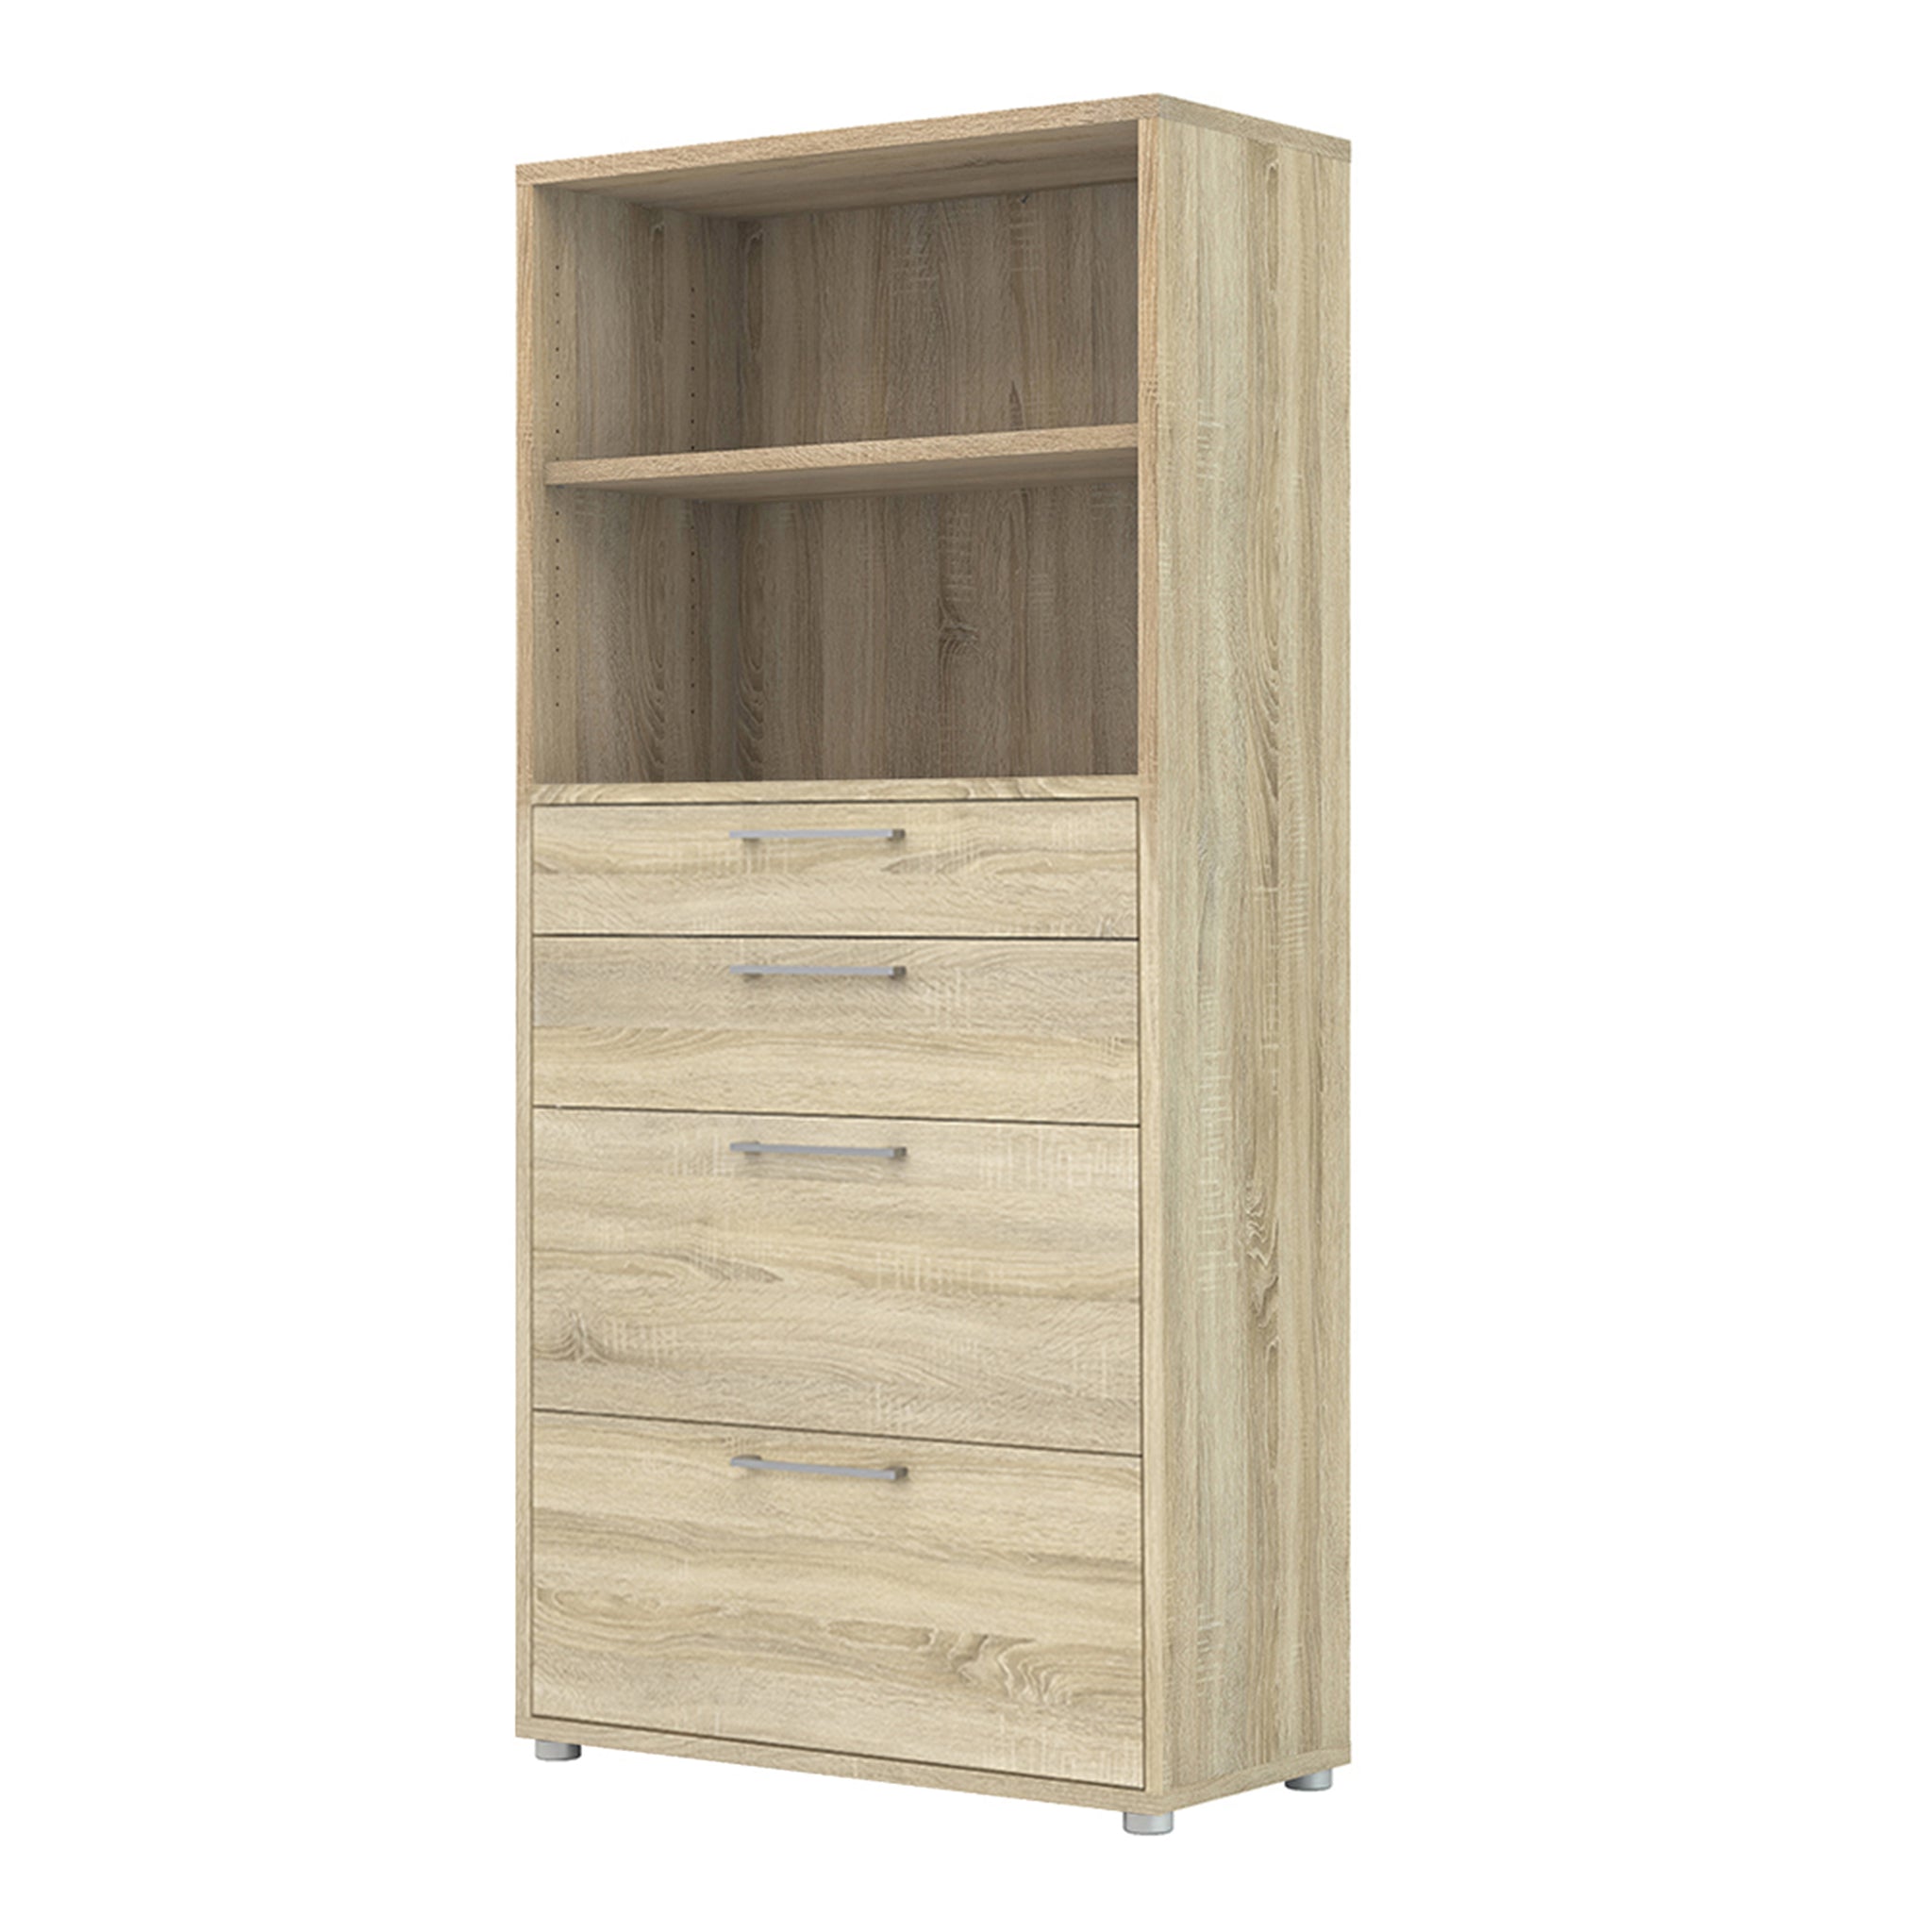 Prima Bookcase 1 Shelf With 2 Drawers + 2 File Drawers In Oak